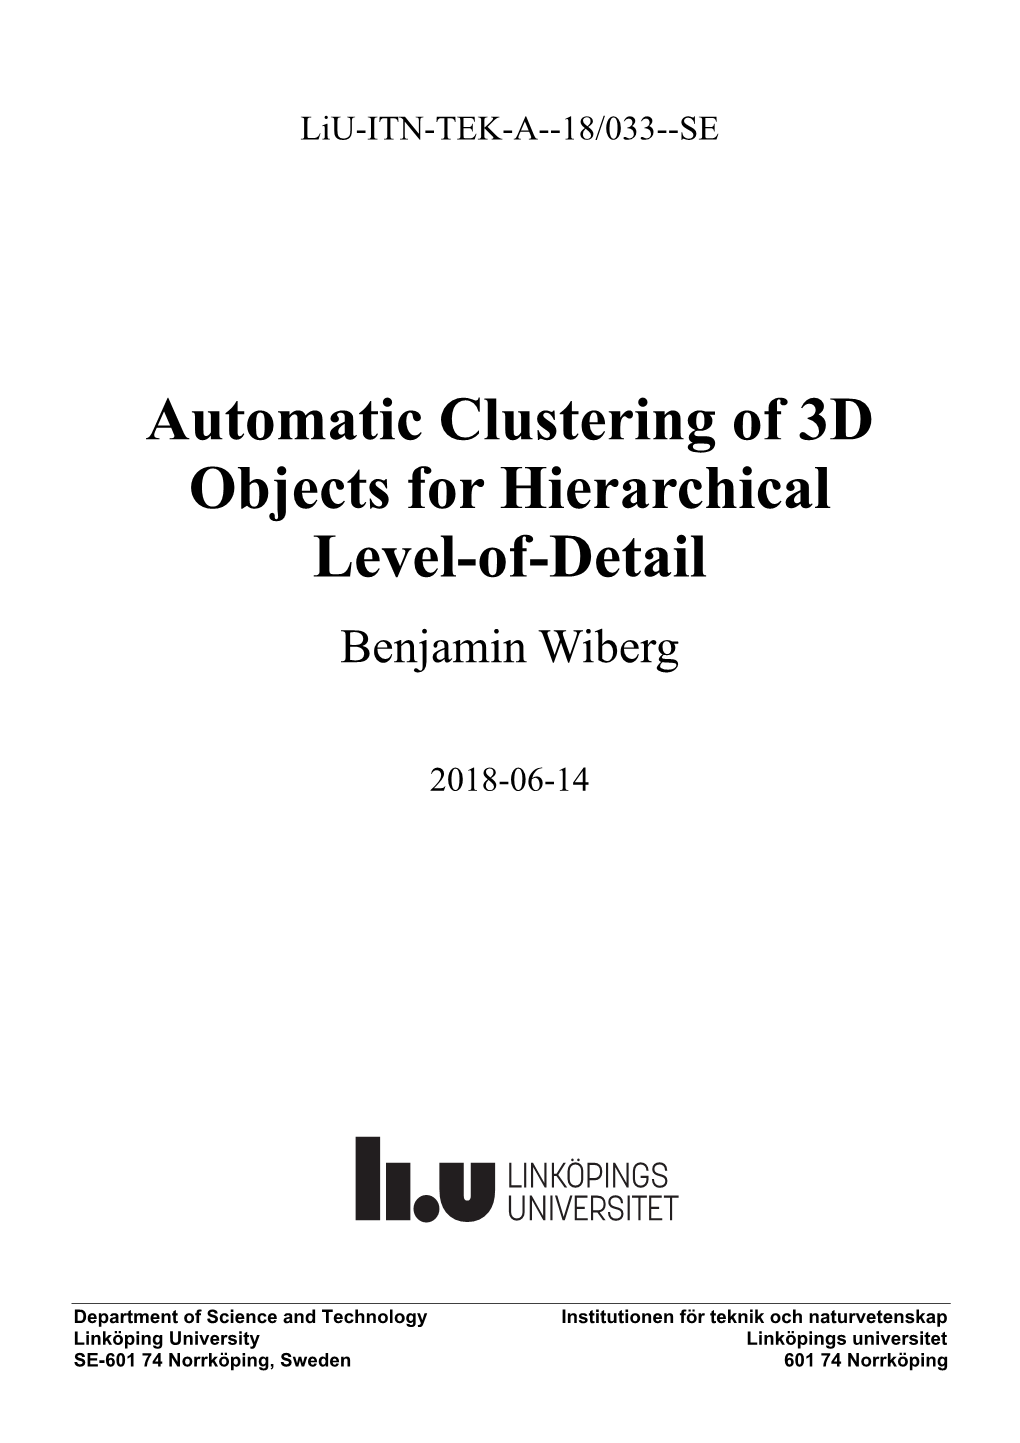 Automatic Clustering of 3D Objects for Hierarchical Level-Of-Detail Benjamin Wiberg